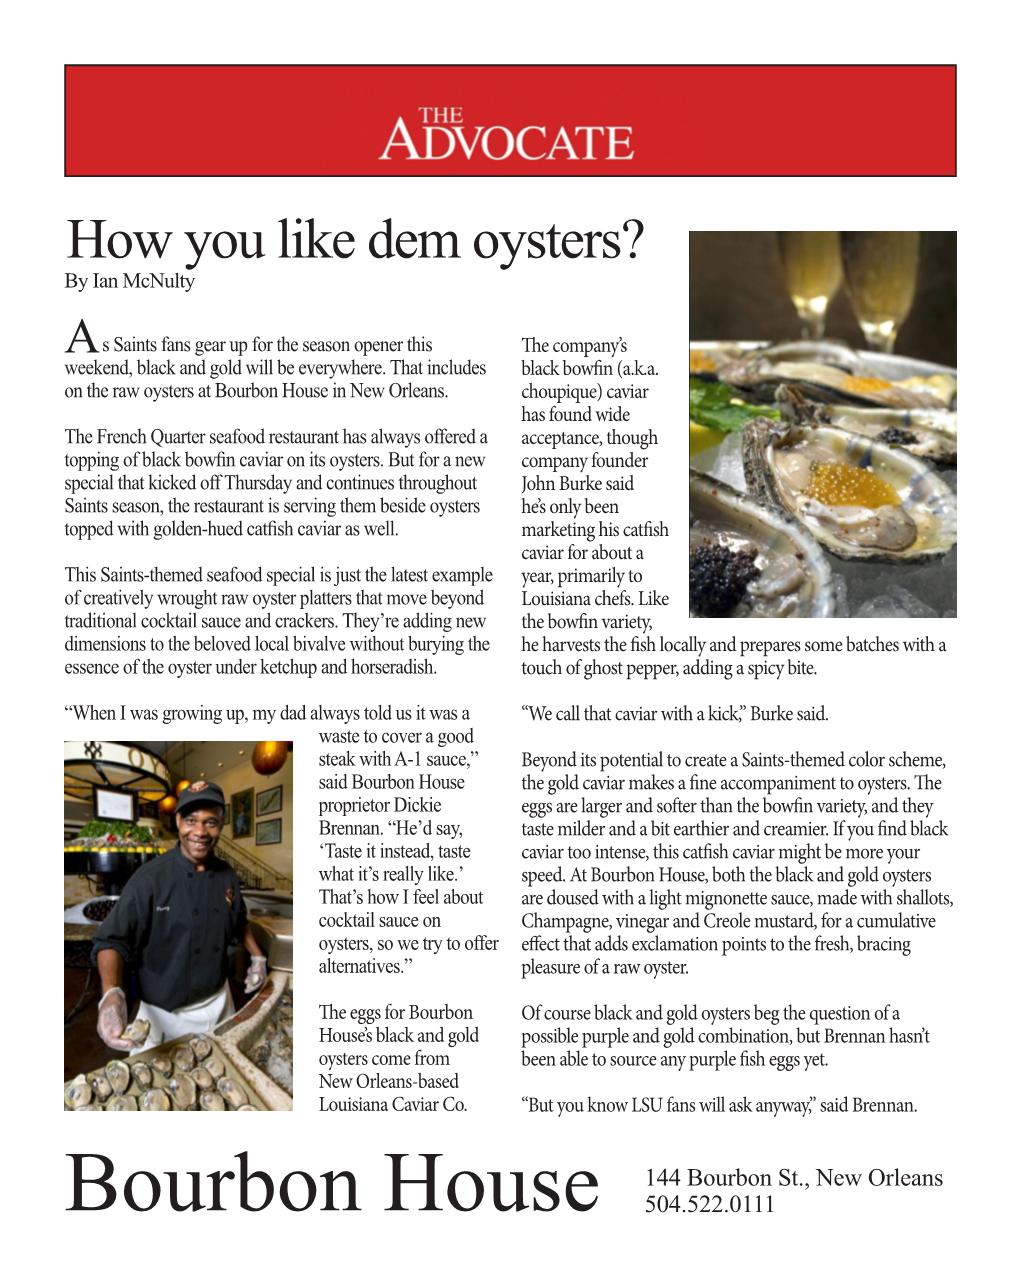 How You Like Dem Oysters? by Ian Mcnulty